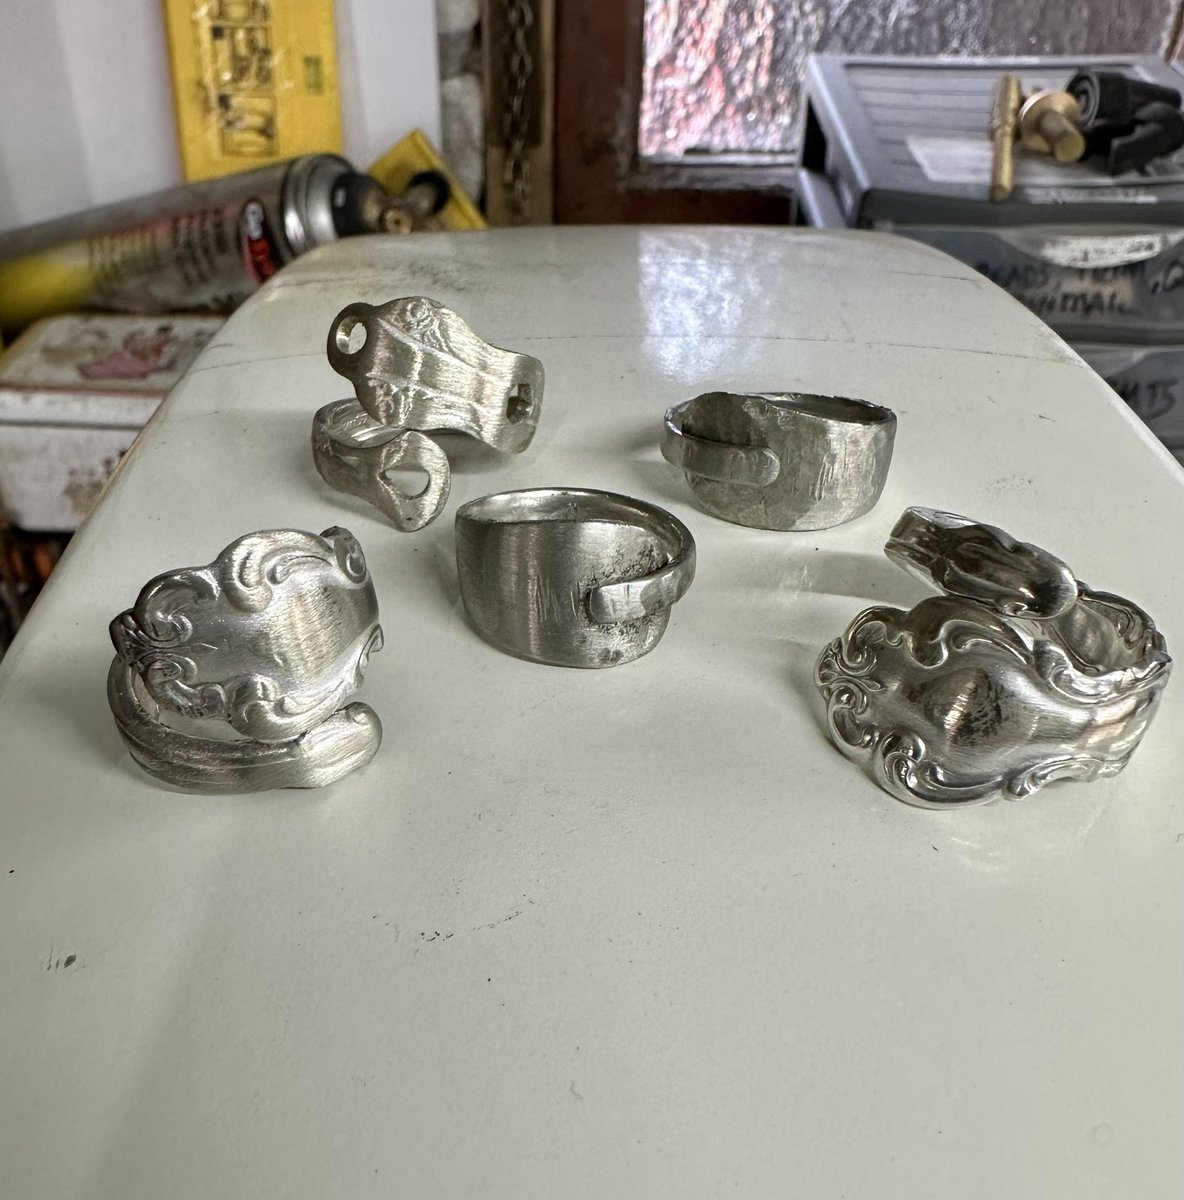 Spoon rings from today, there is something very satisfying about bending metal. #handmade #scotland